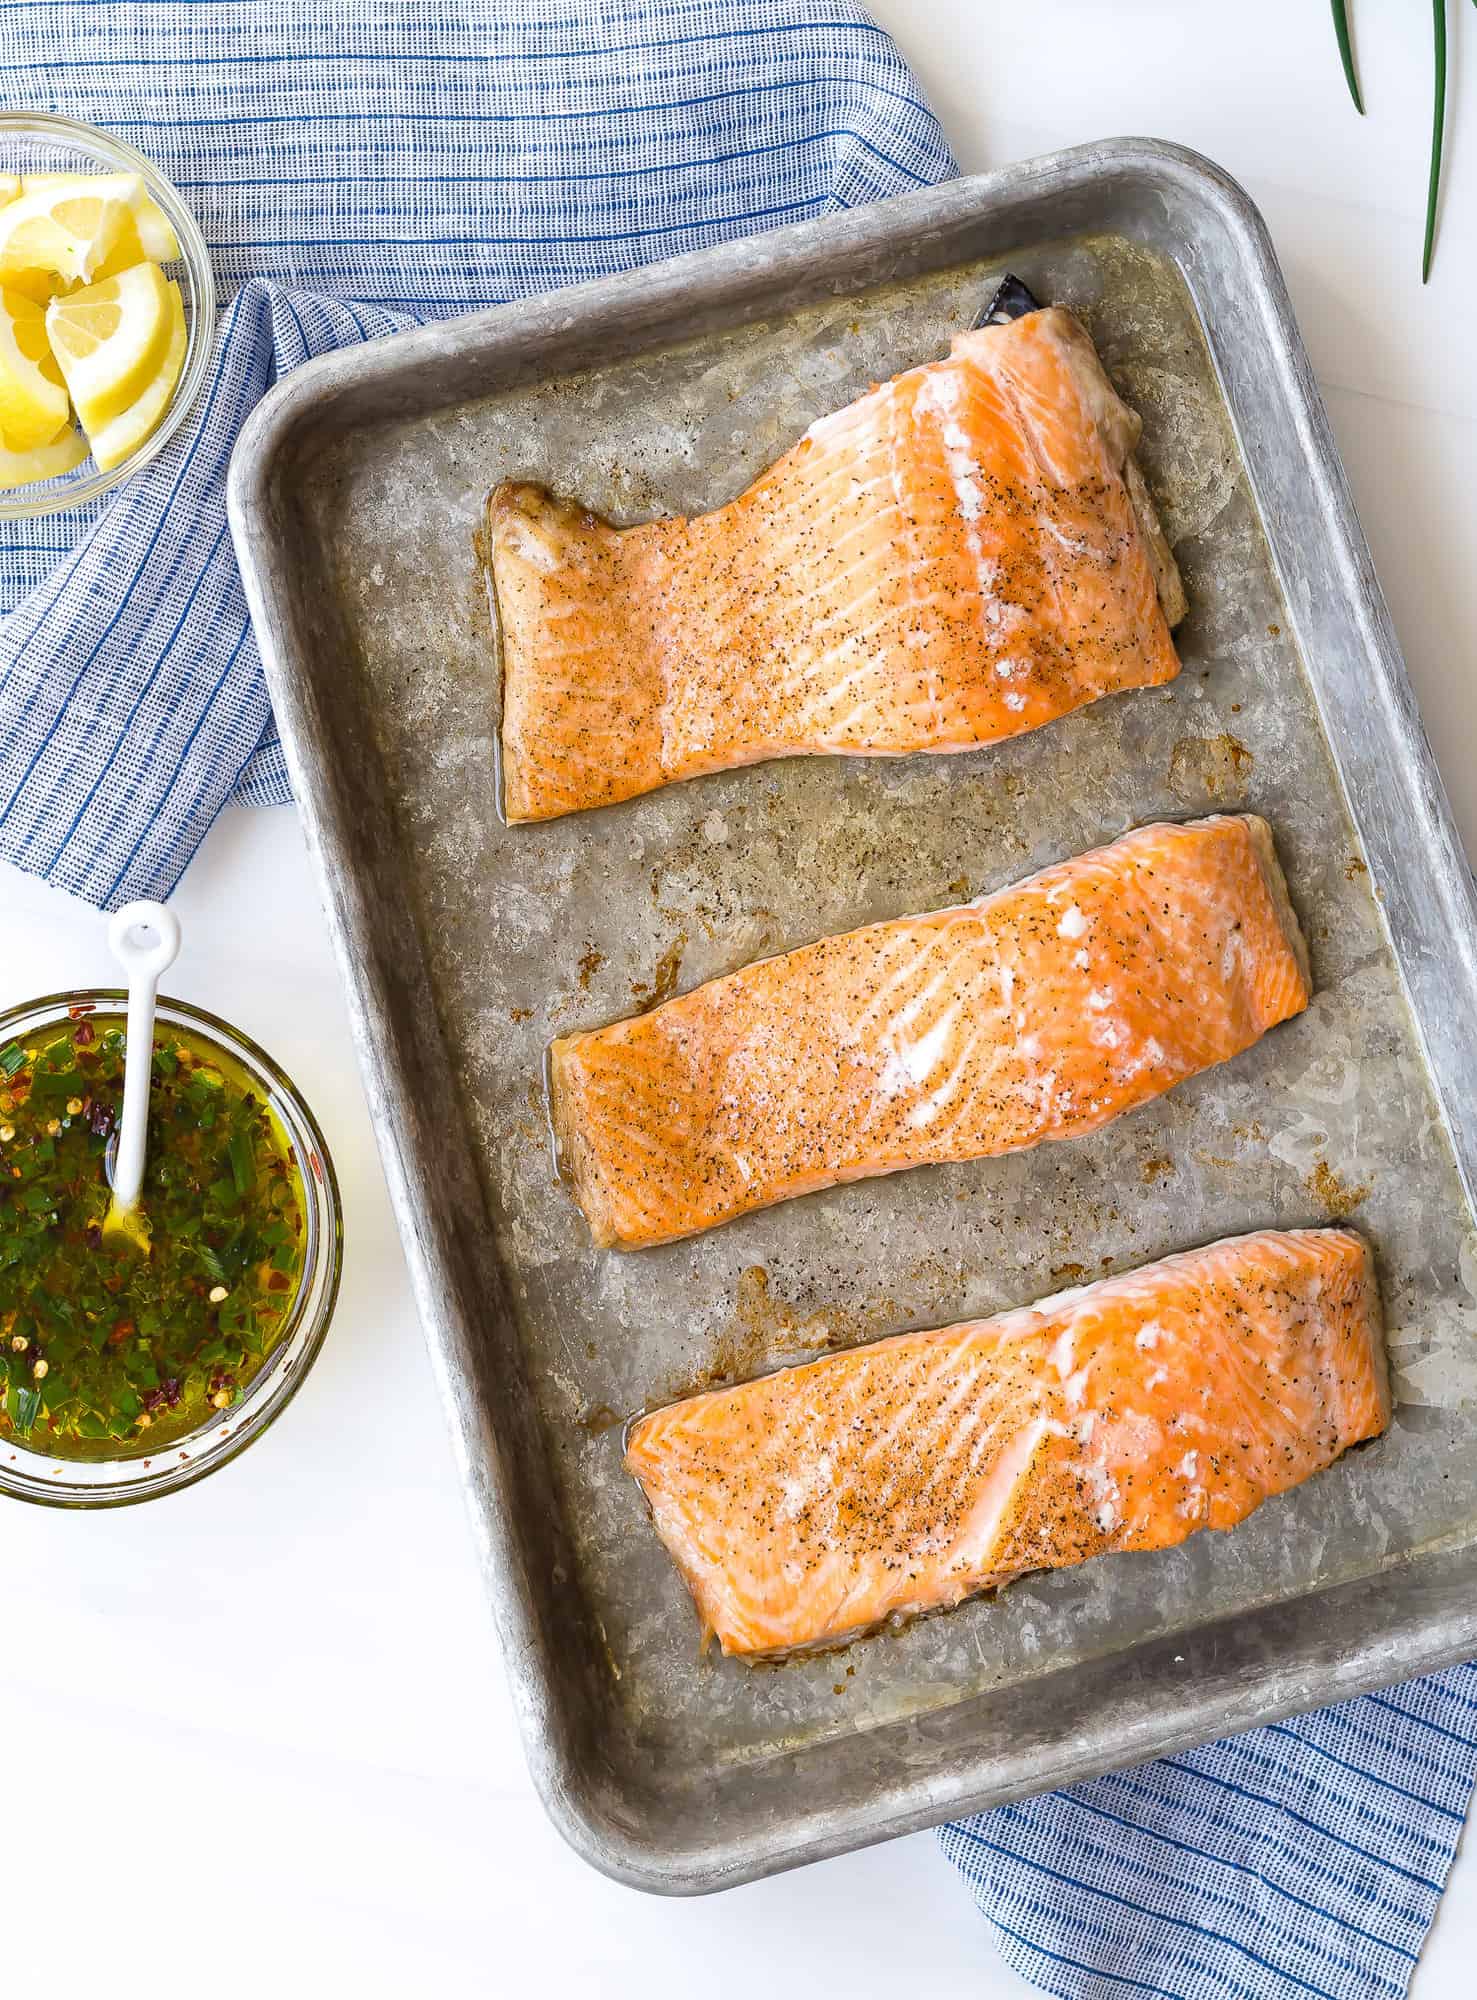 Baked salmon seasoned with salt and pepper.